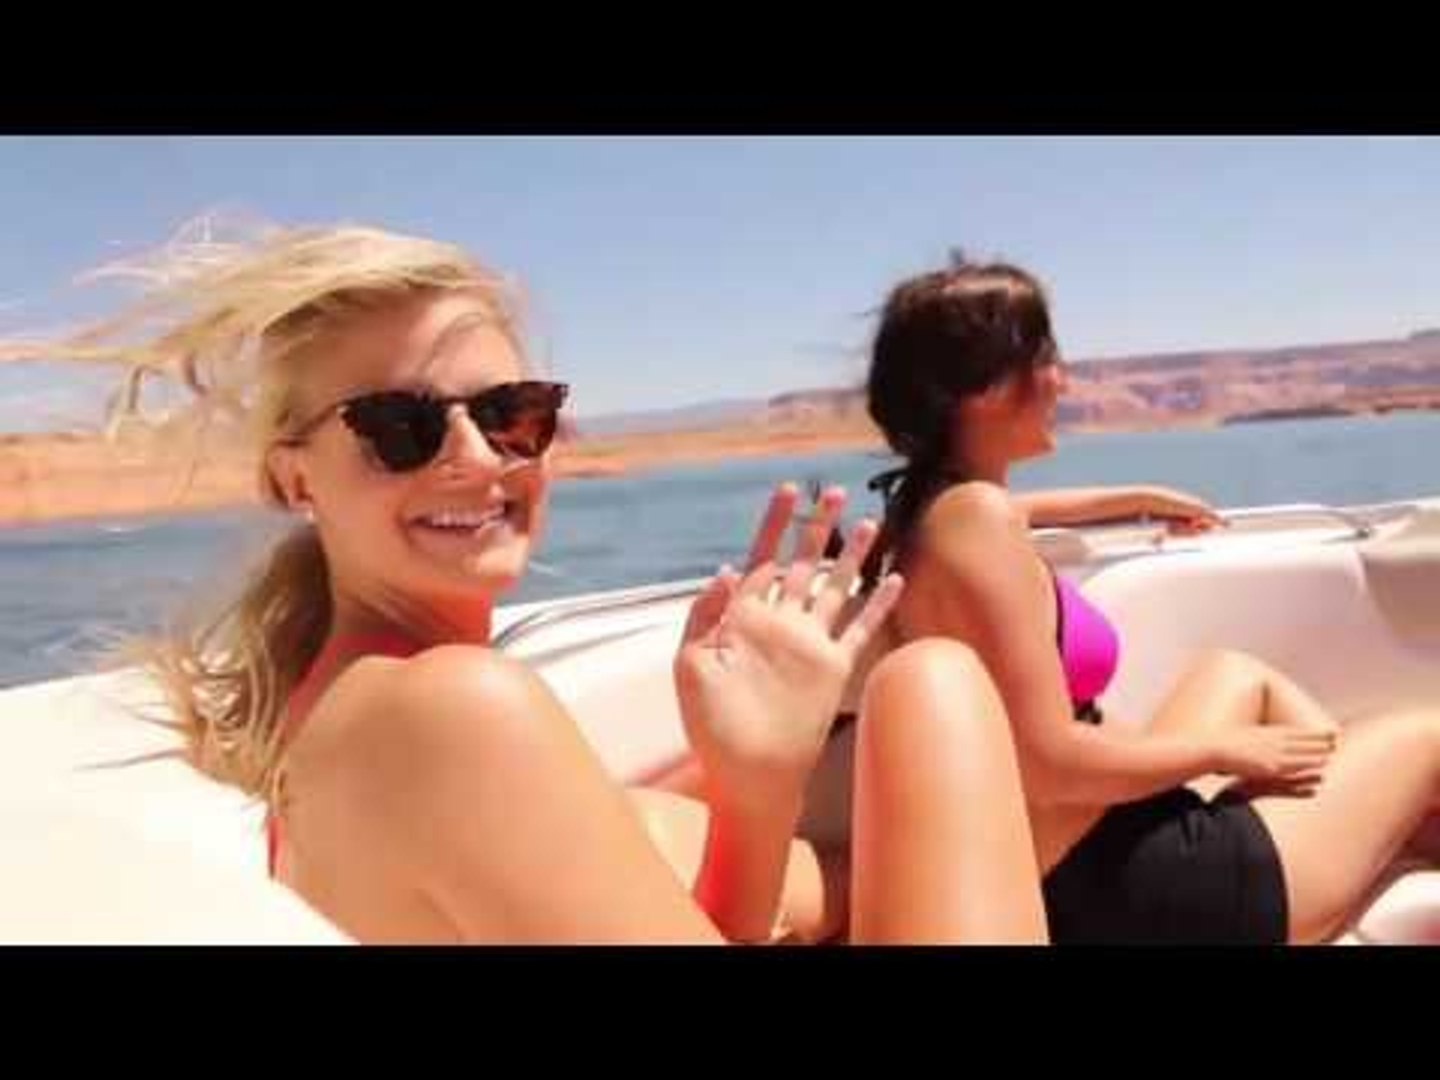 AZTV visits Antelope Point Marina on Lake Powell for a little fun in the sun.